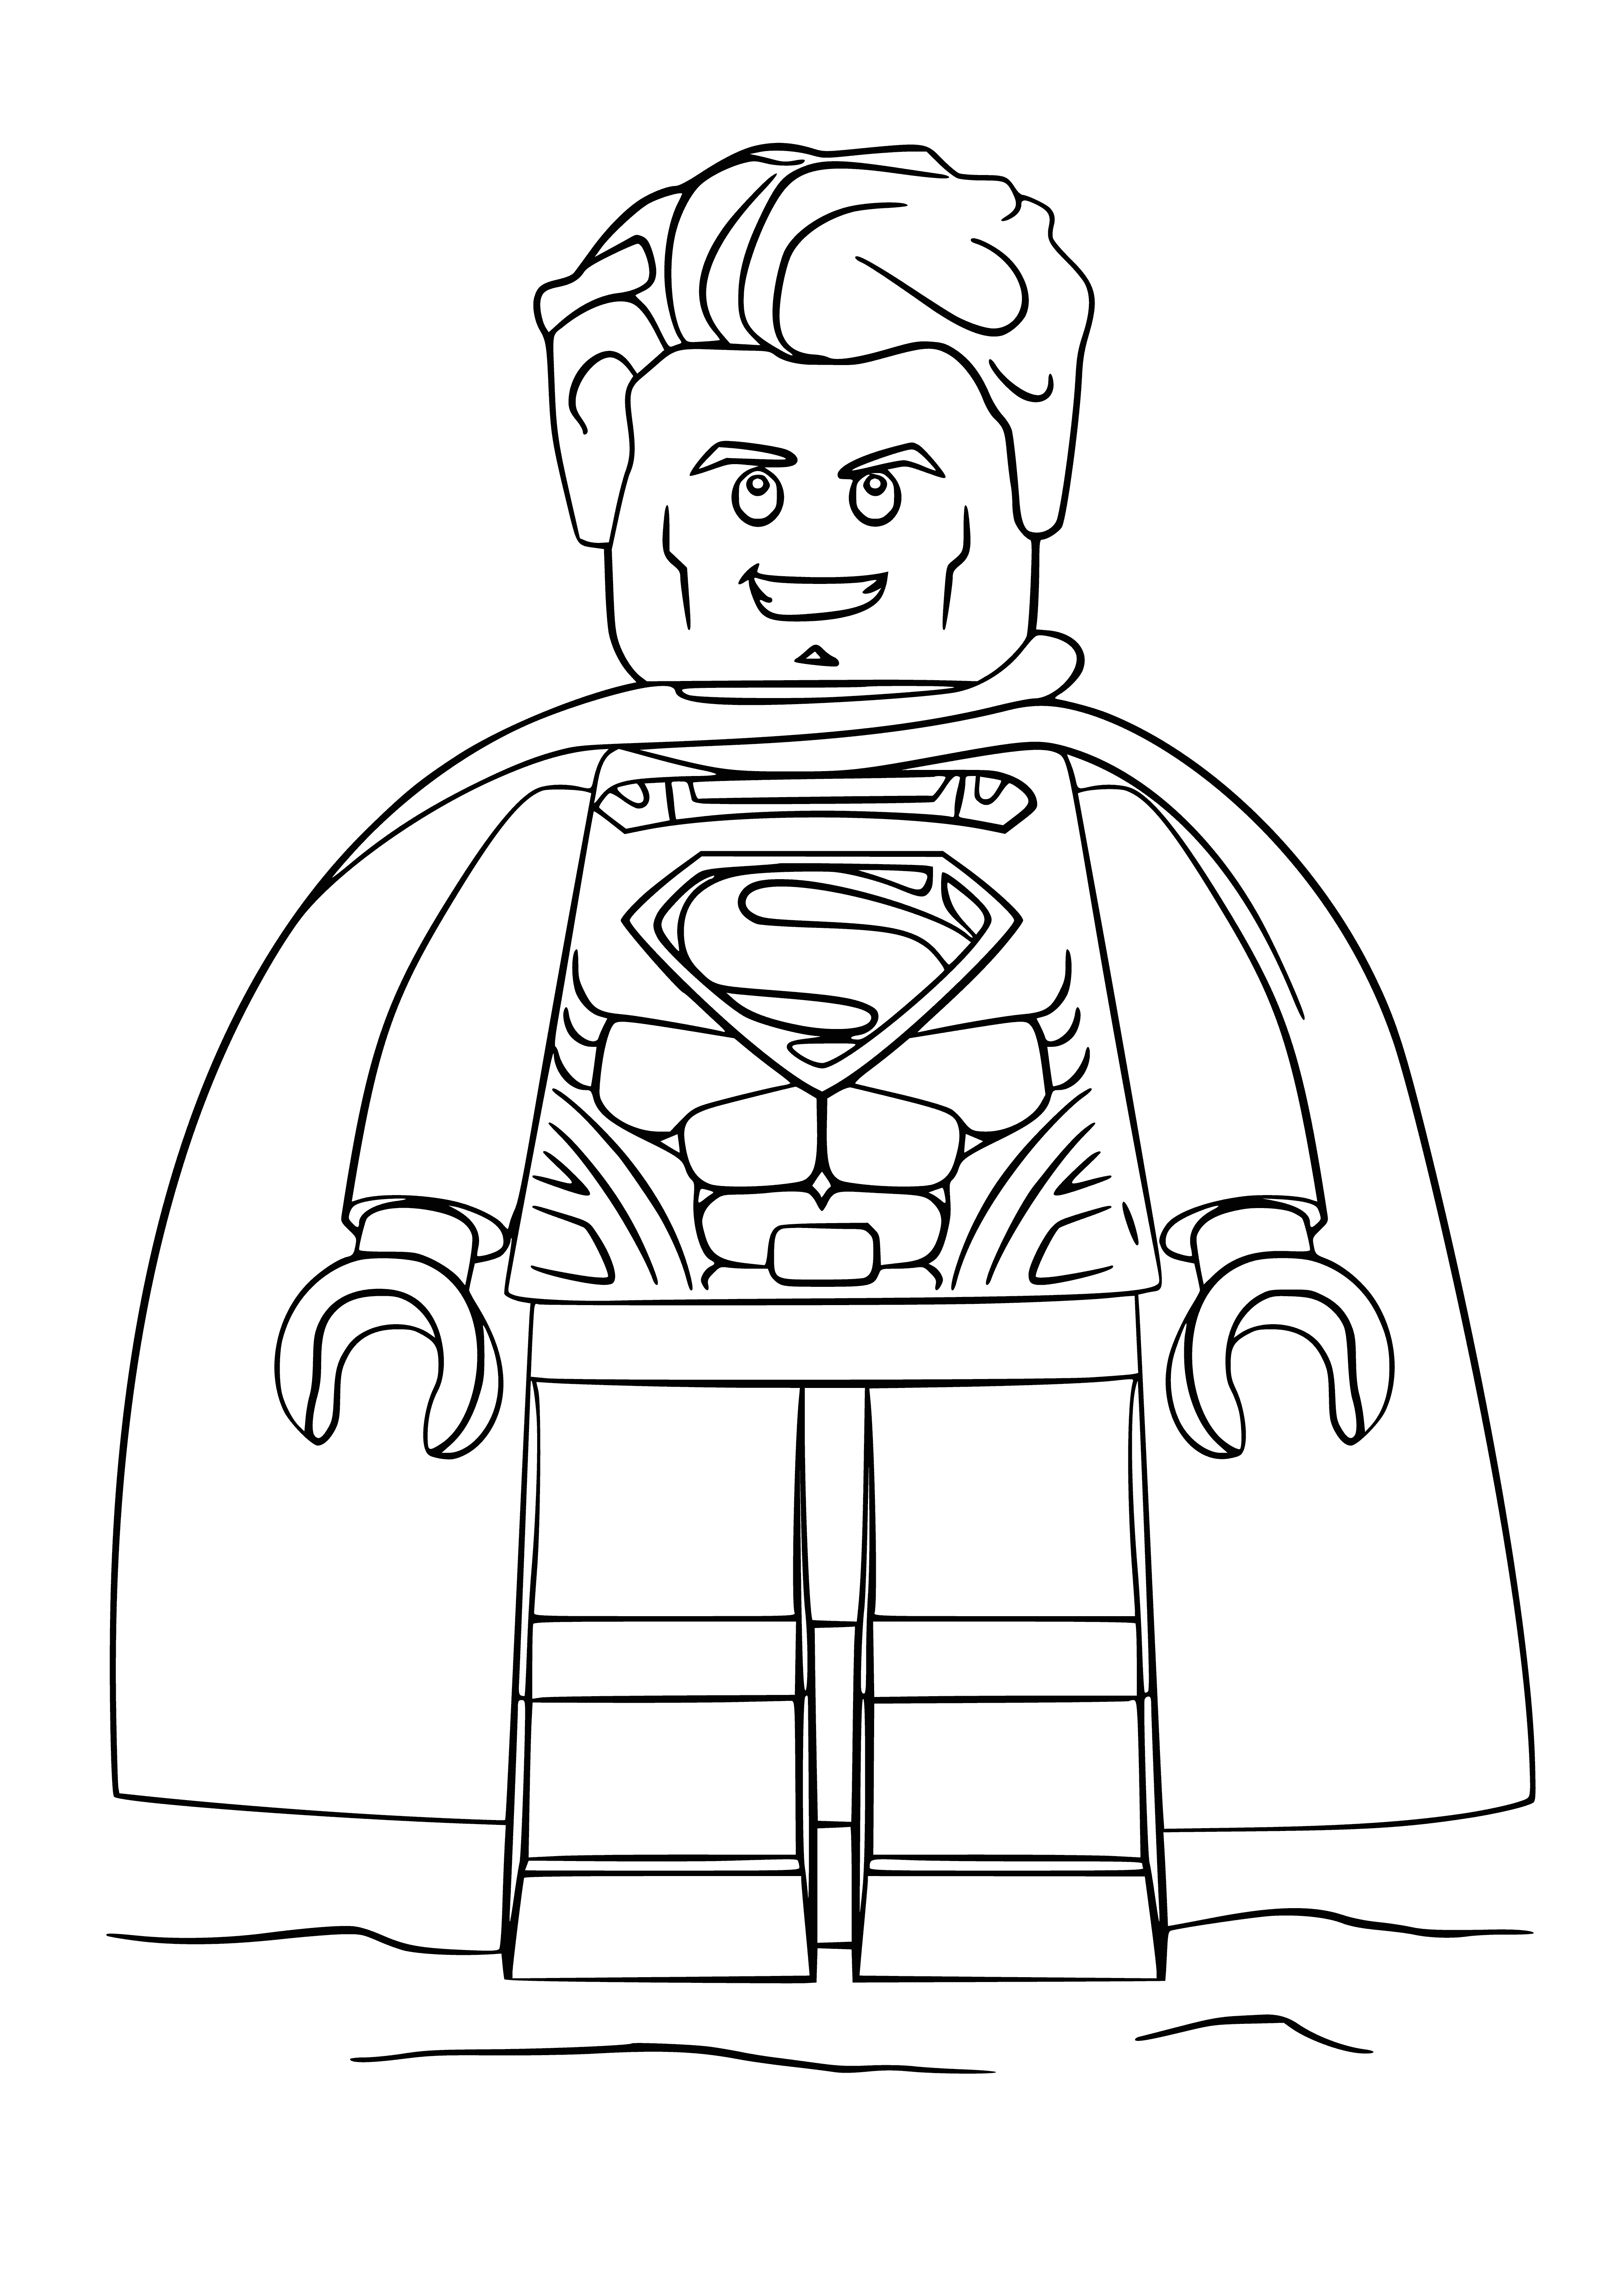 coloring page: Superman confidently facing side, wearing blue cape and red/blue suit with iconic logo, black hair and black belt.